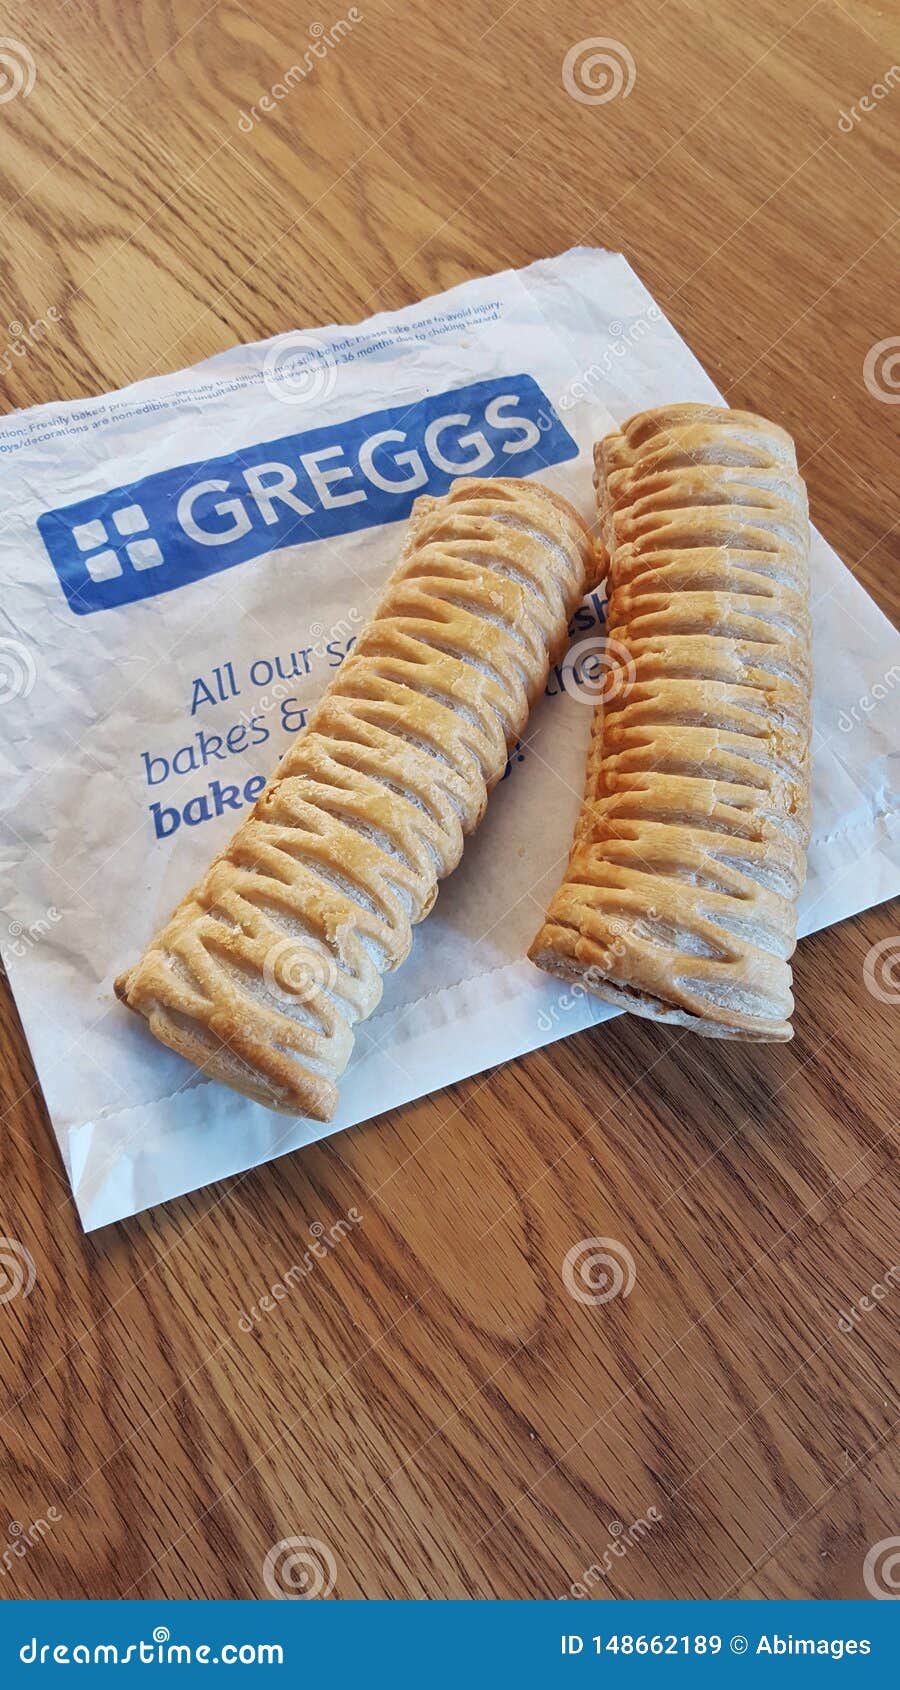 https://thumbs.dreamstime.com/z/greggs-vegan-sausage-rolls-scarborough-uk-may-th-two-placed-paper-bag-introduced-january-roll-has-proved-very-popular-148662189.jpg